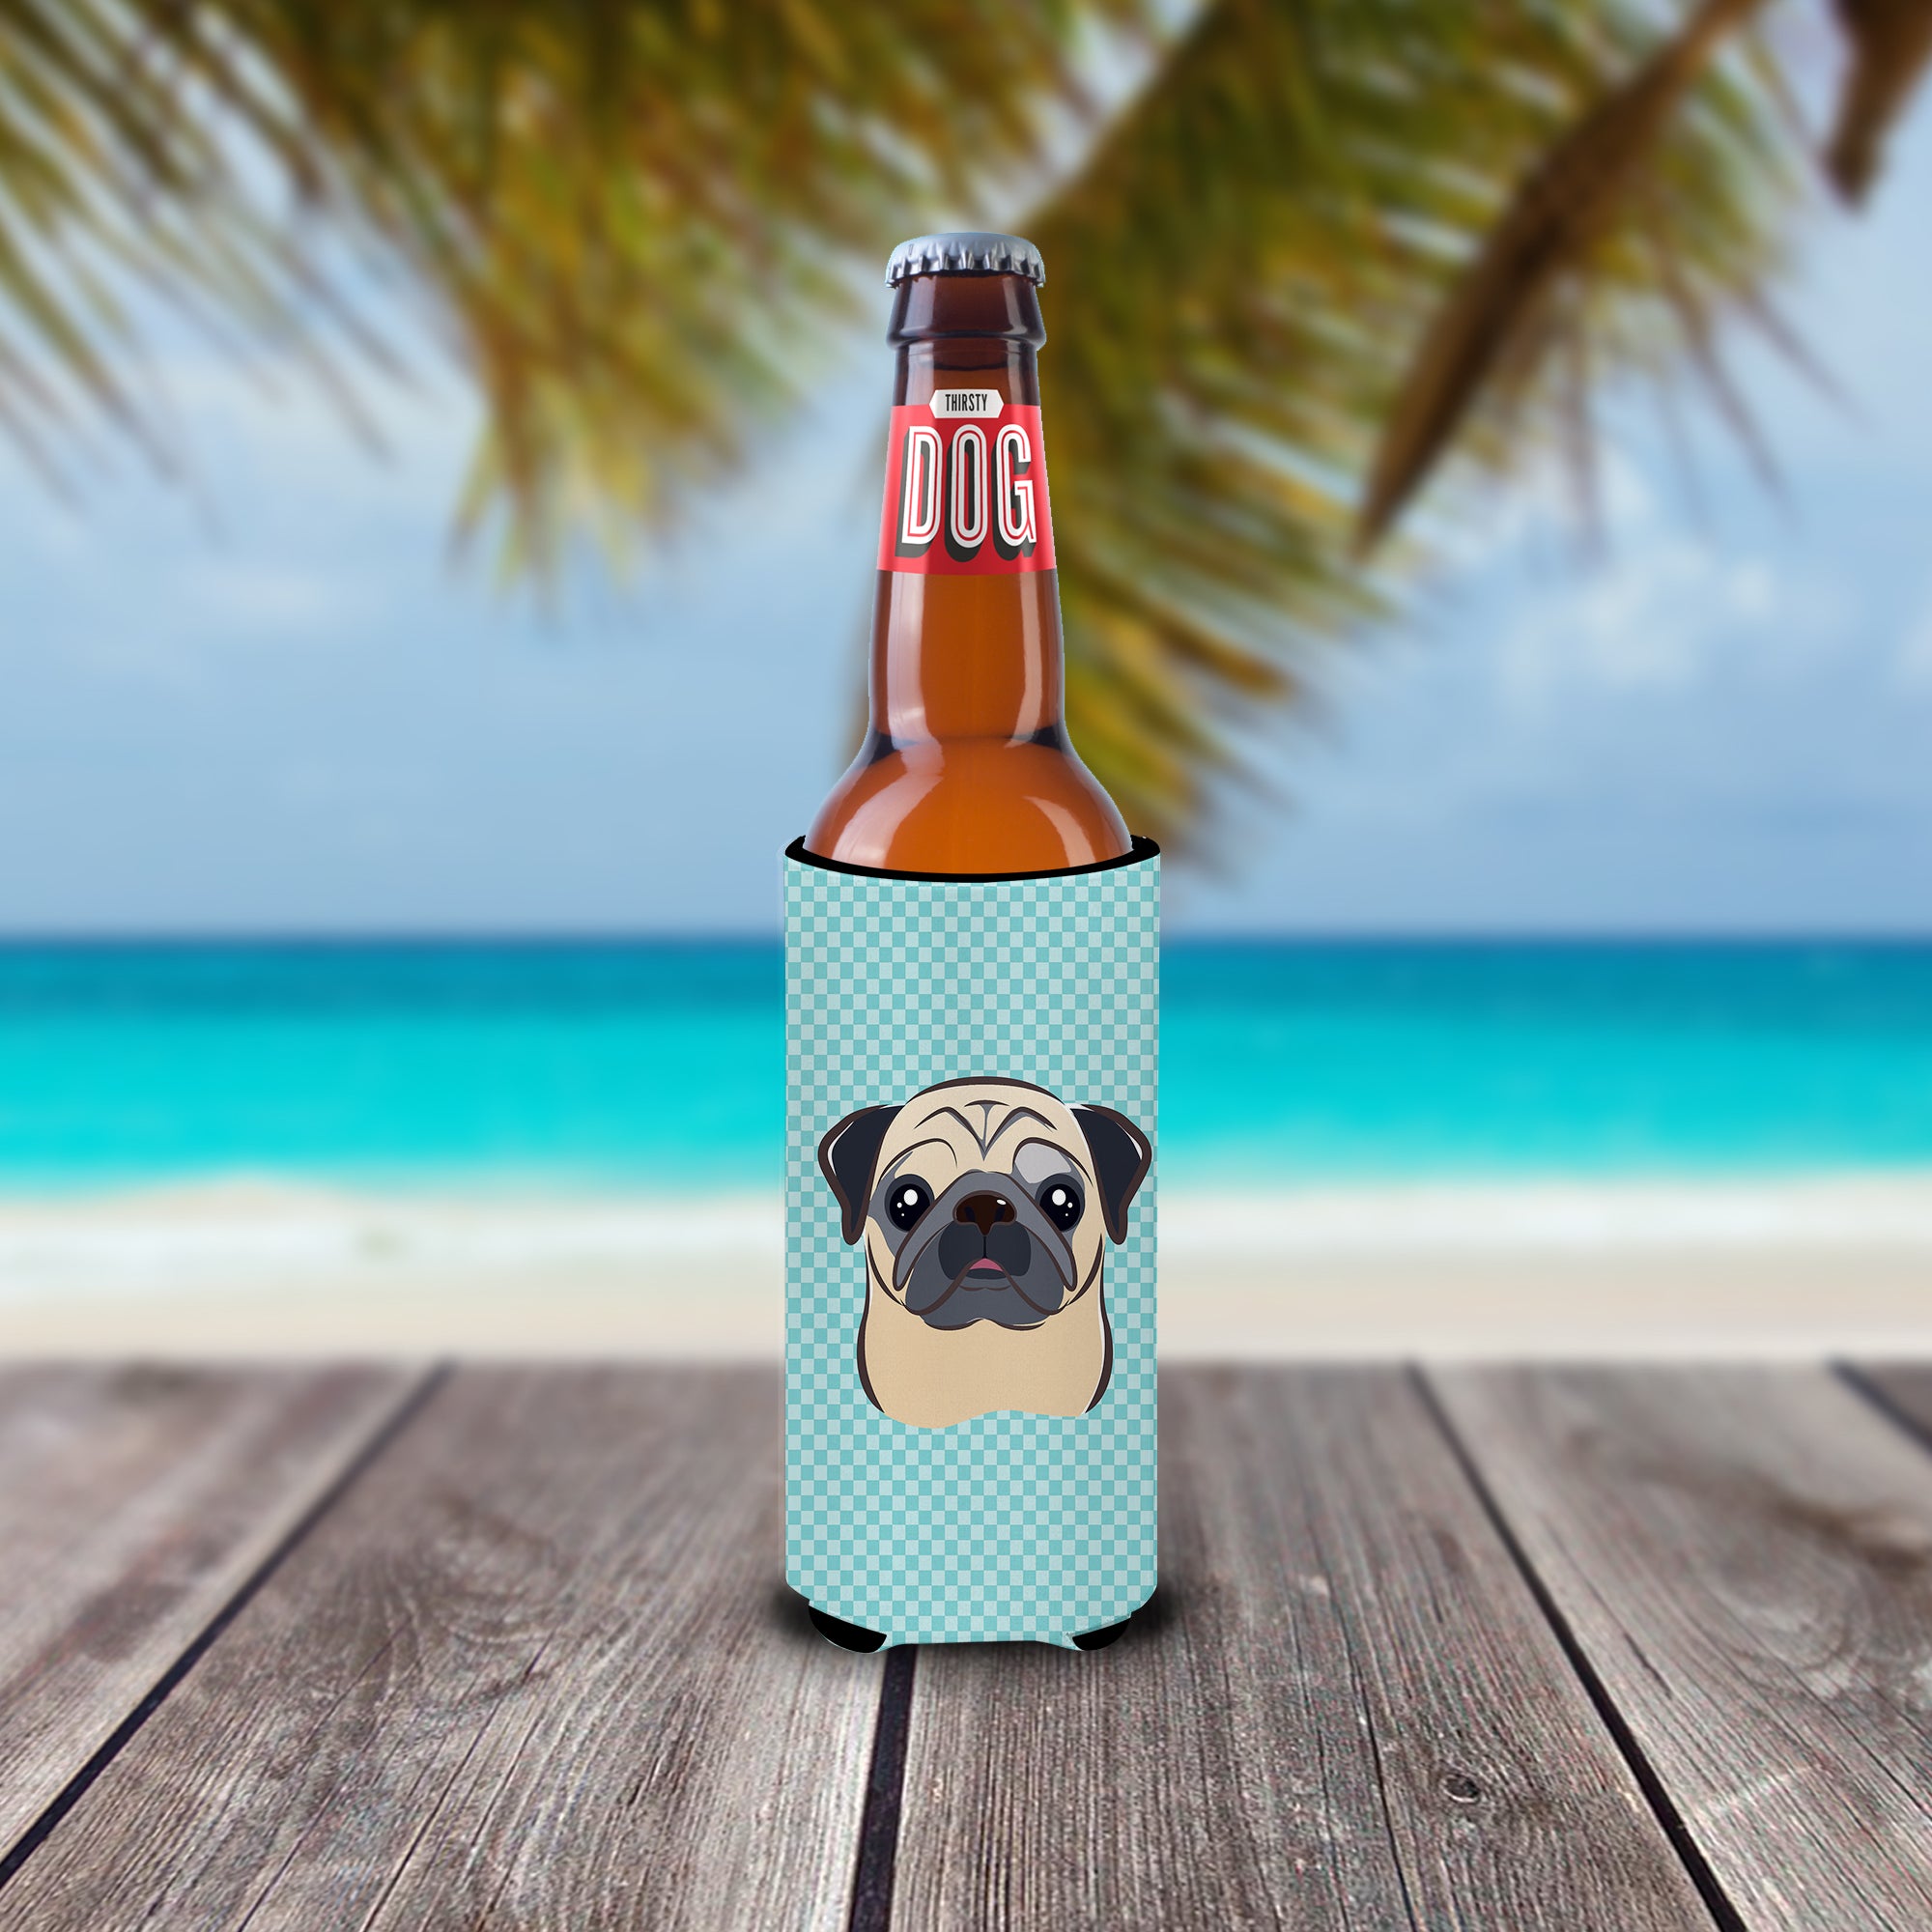 Checkerboard Blue Fawn Pug Ultra Beverage Insulators for slim cans BB1200MUK.